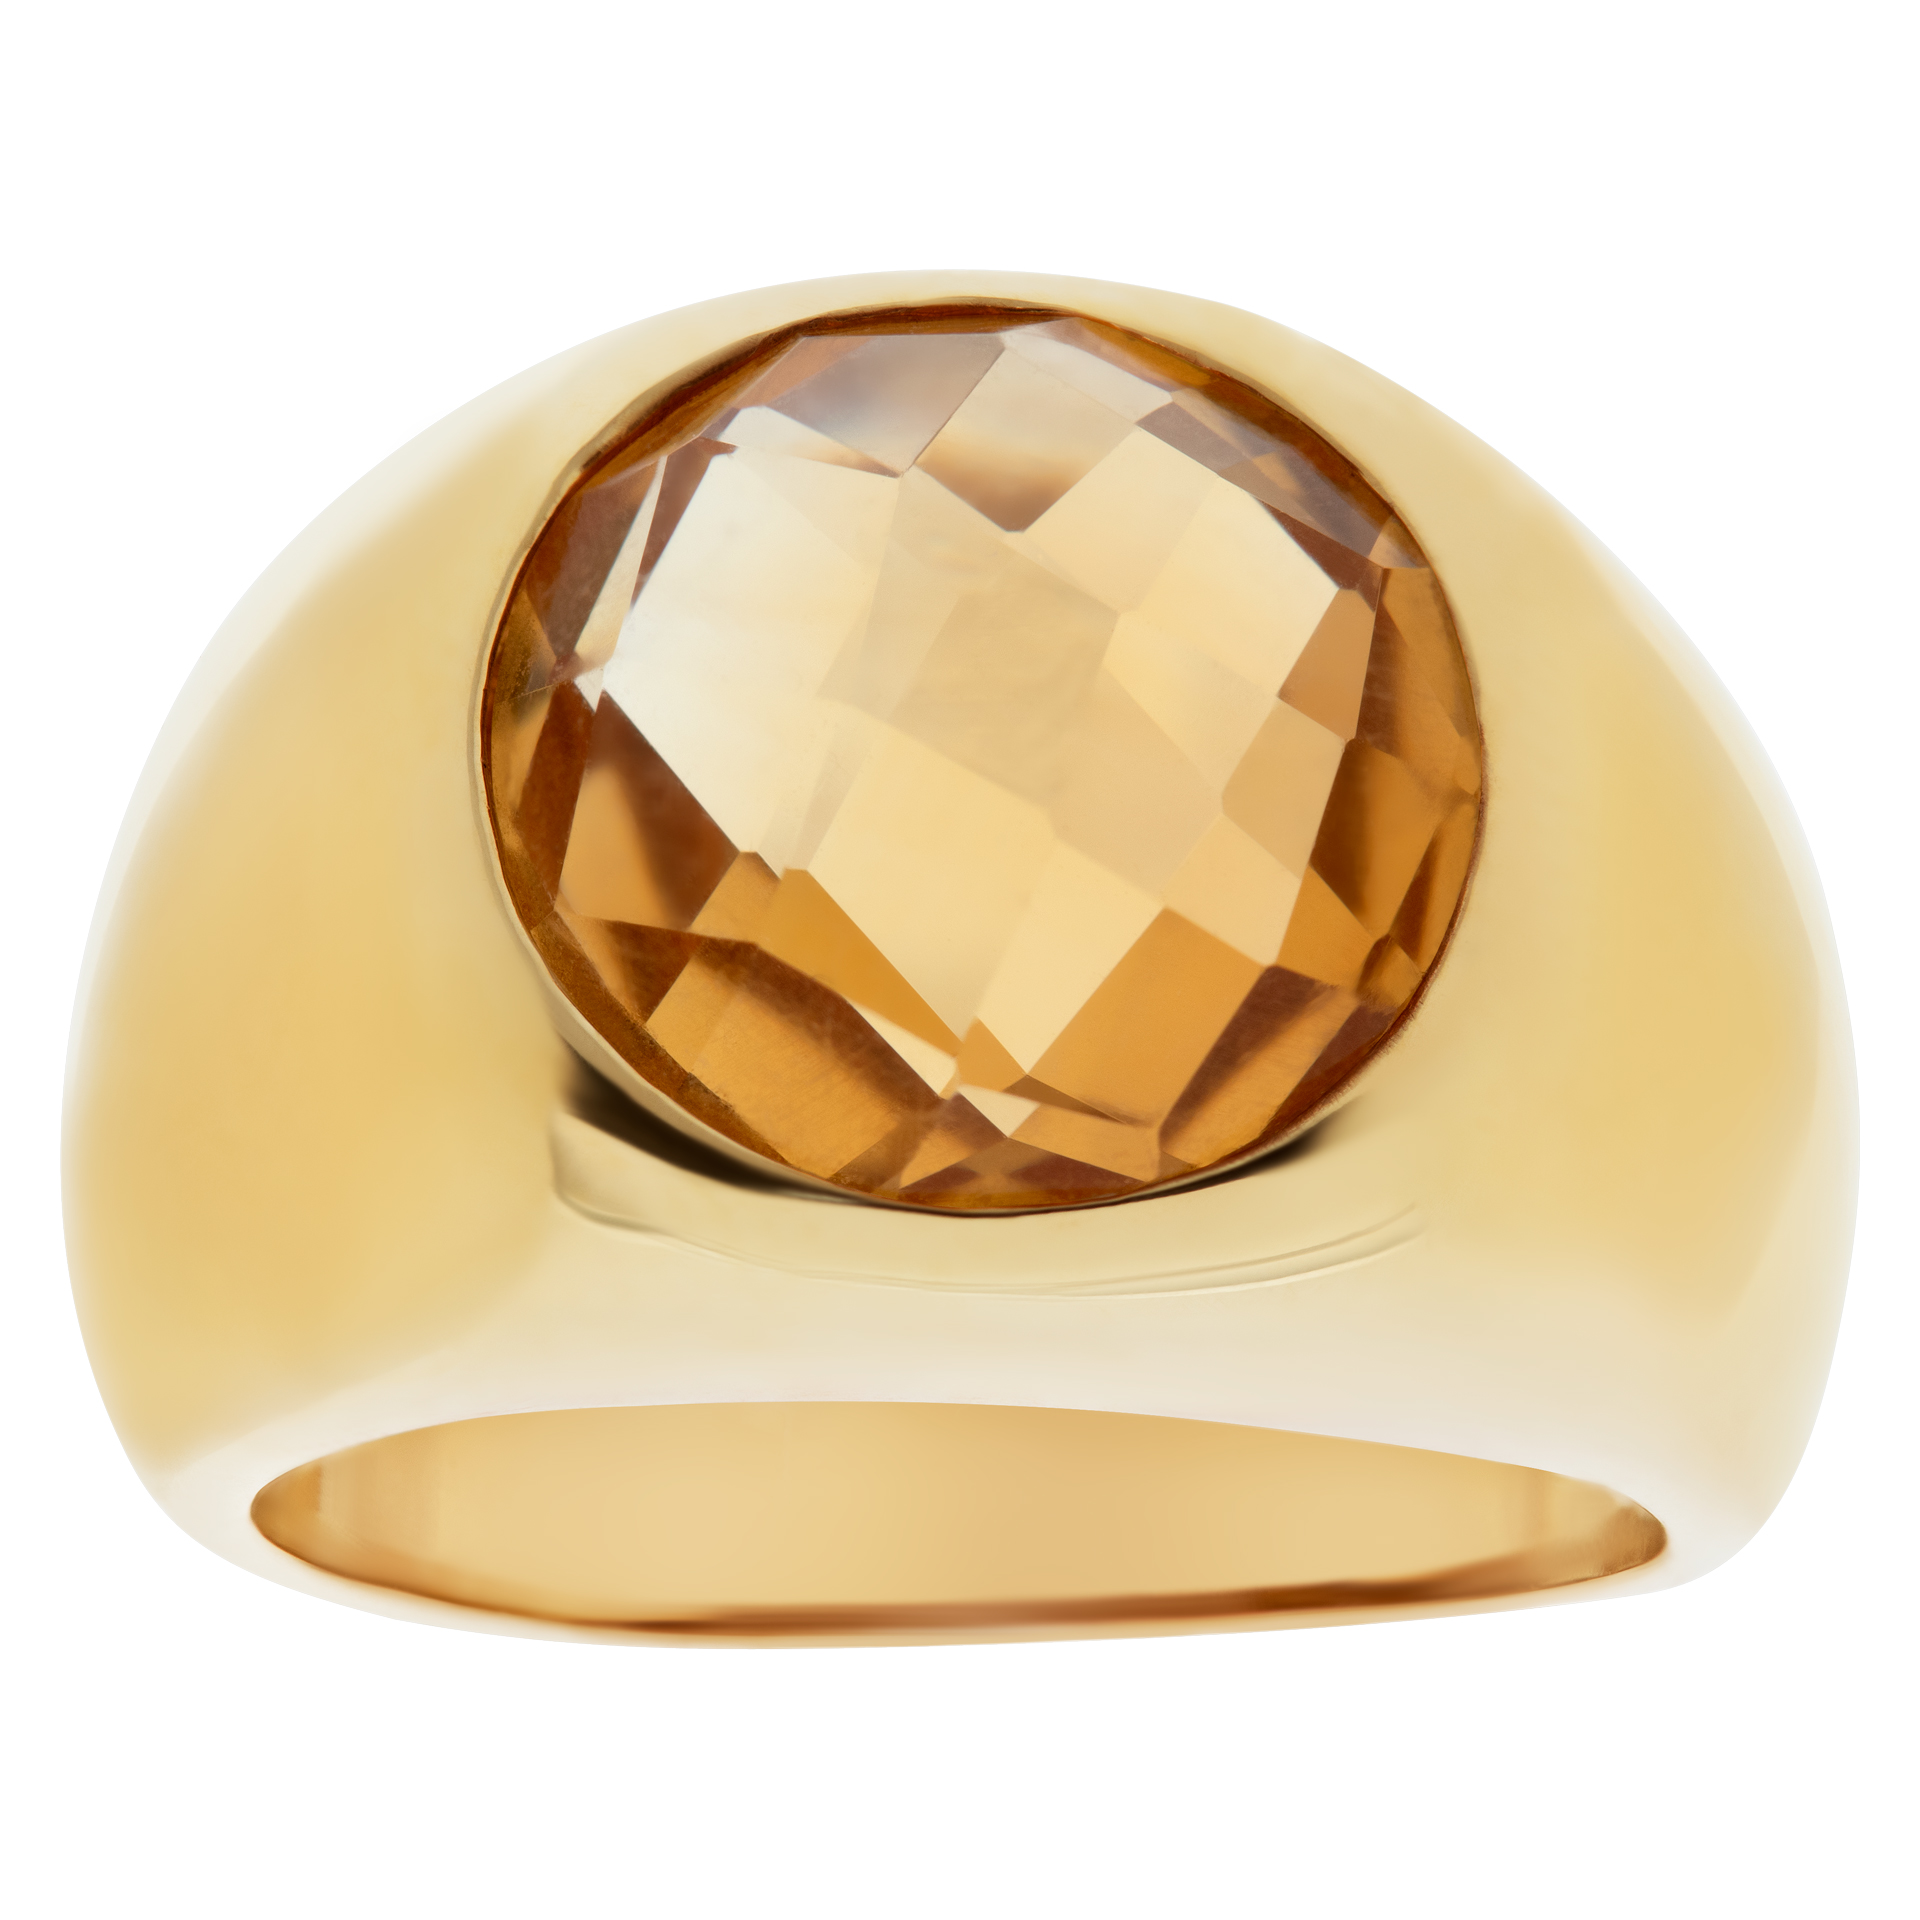 Shimmering faceted citrine ring in 18K yellow gold.